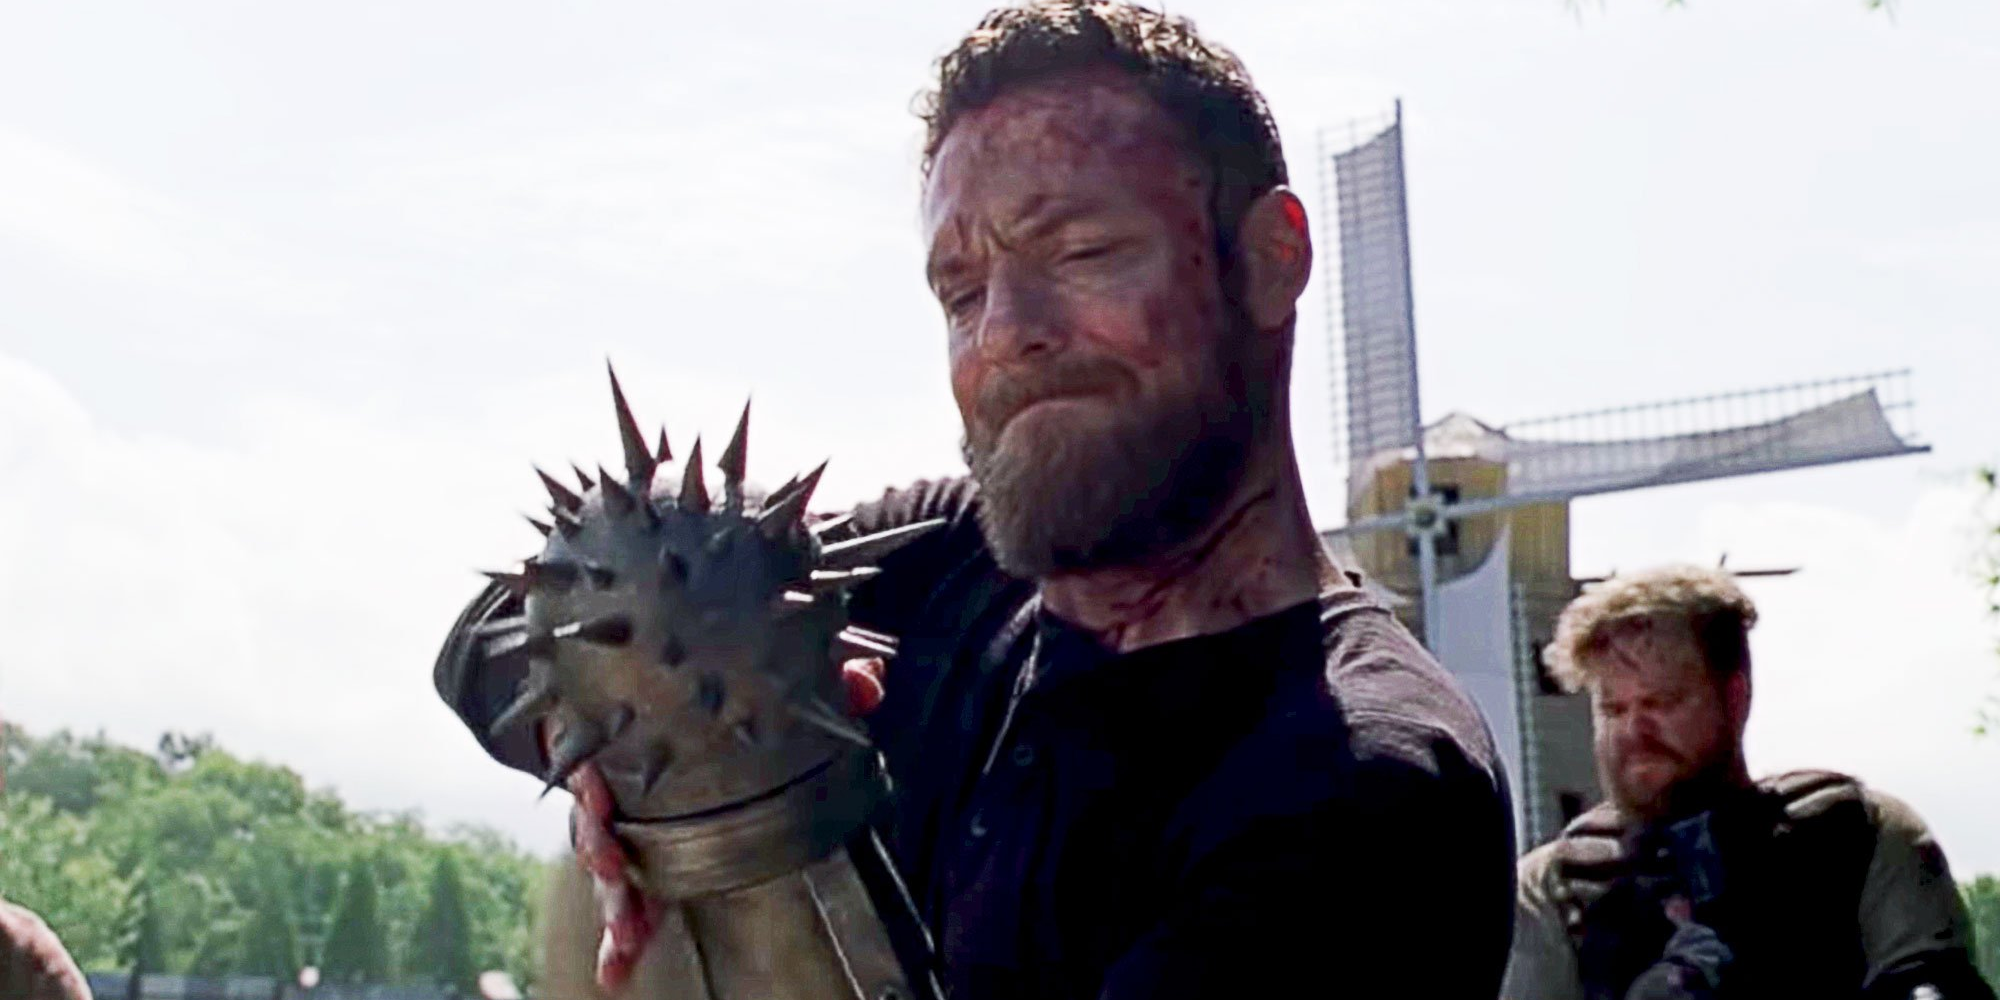 Aaron adjusts the spiked metal ball attached to his arm before a battle in 'The Walking Dead'